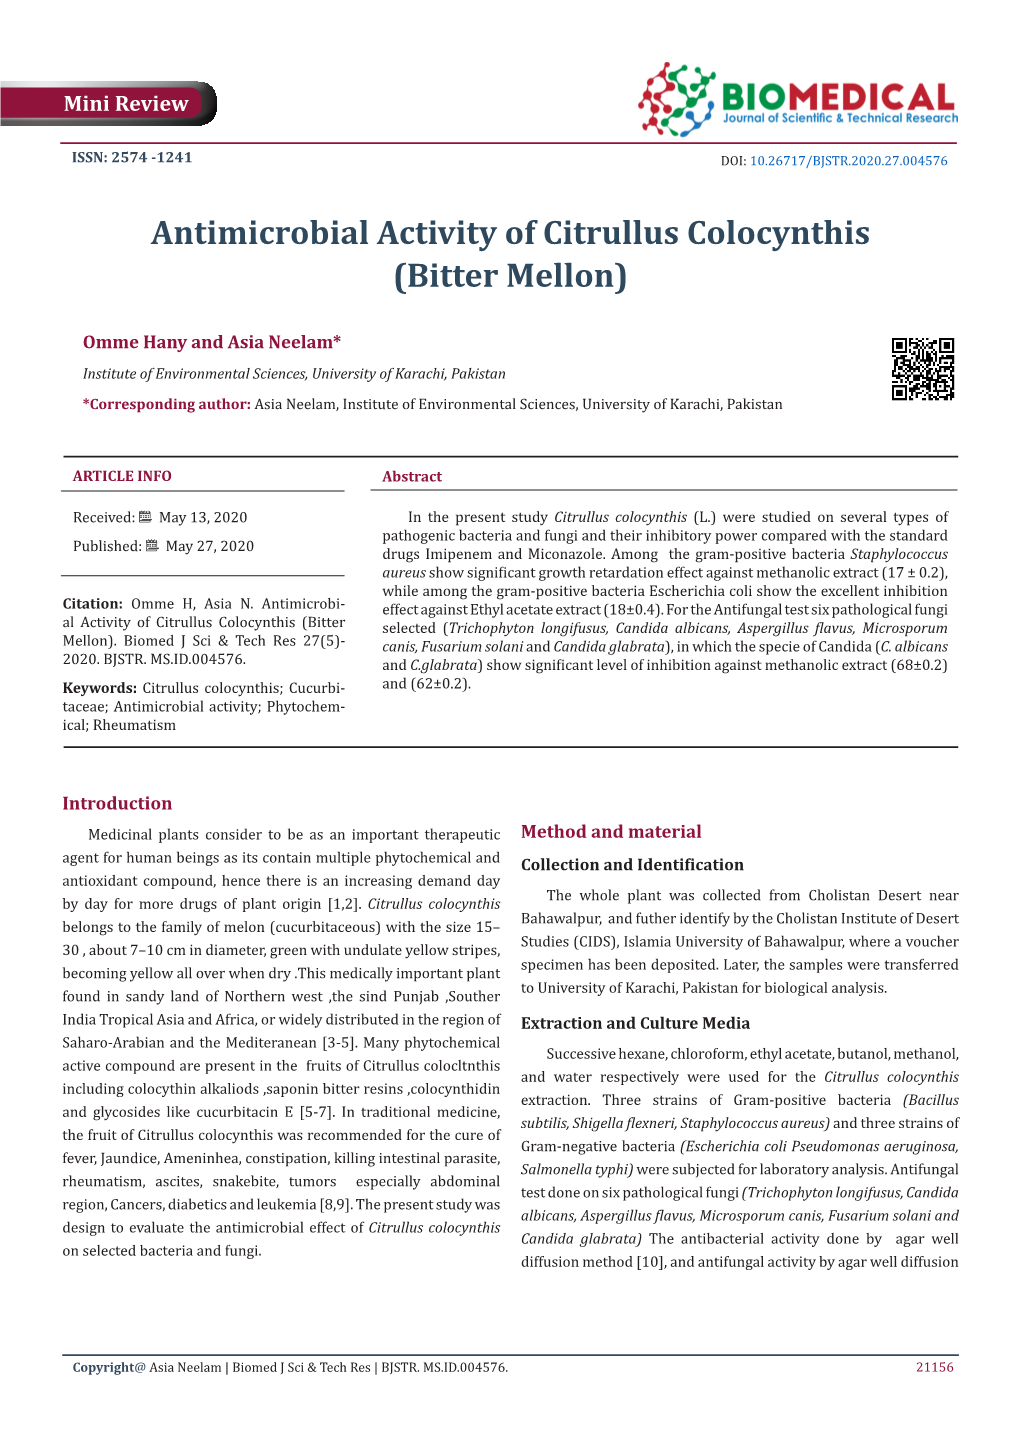 Antimicrobial Activity of Citrullus Colocynthis (Bitter Mellon)